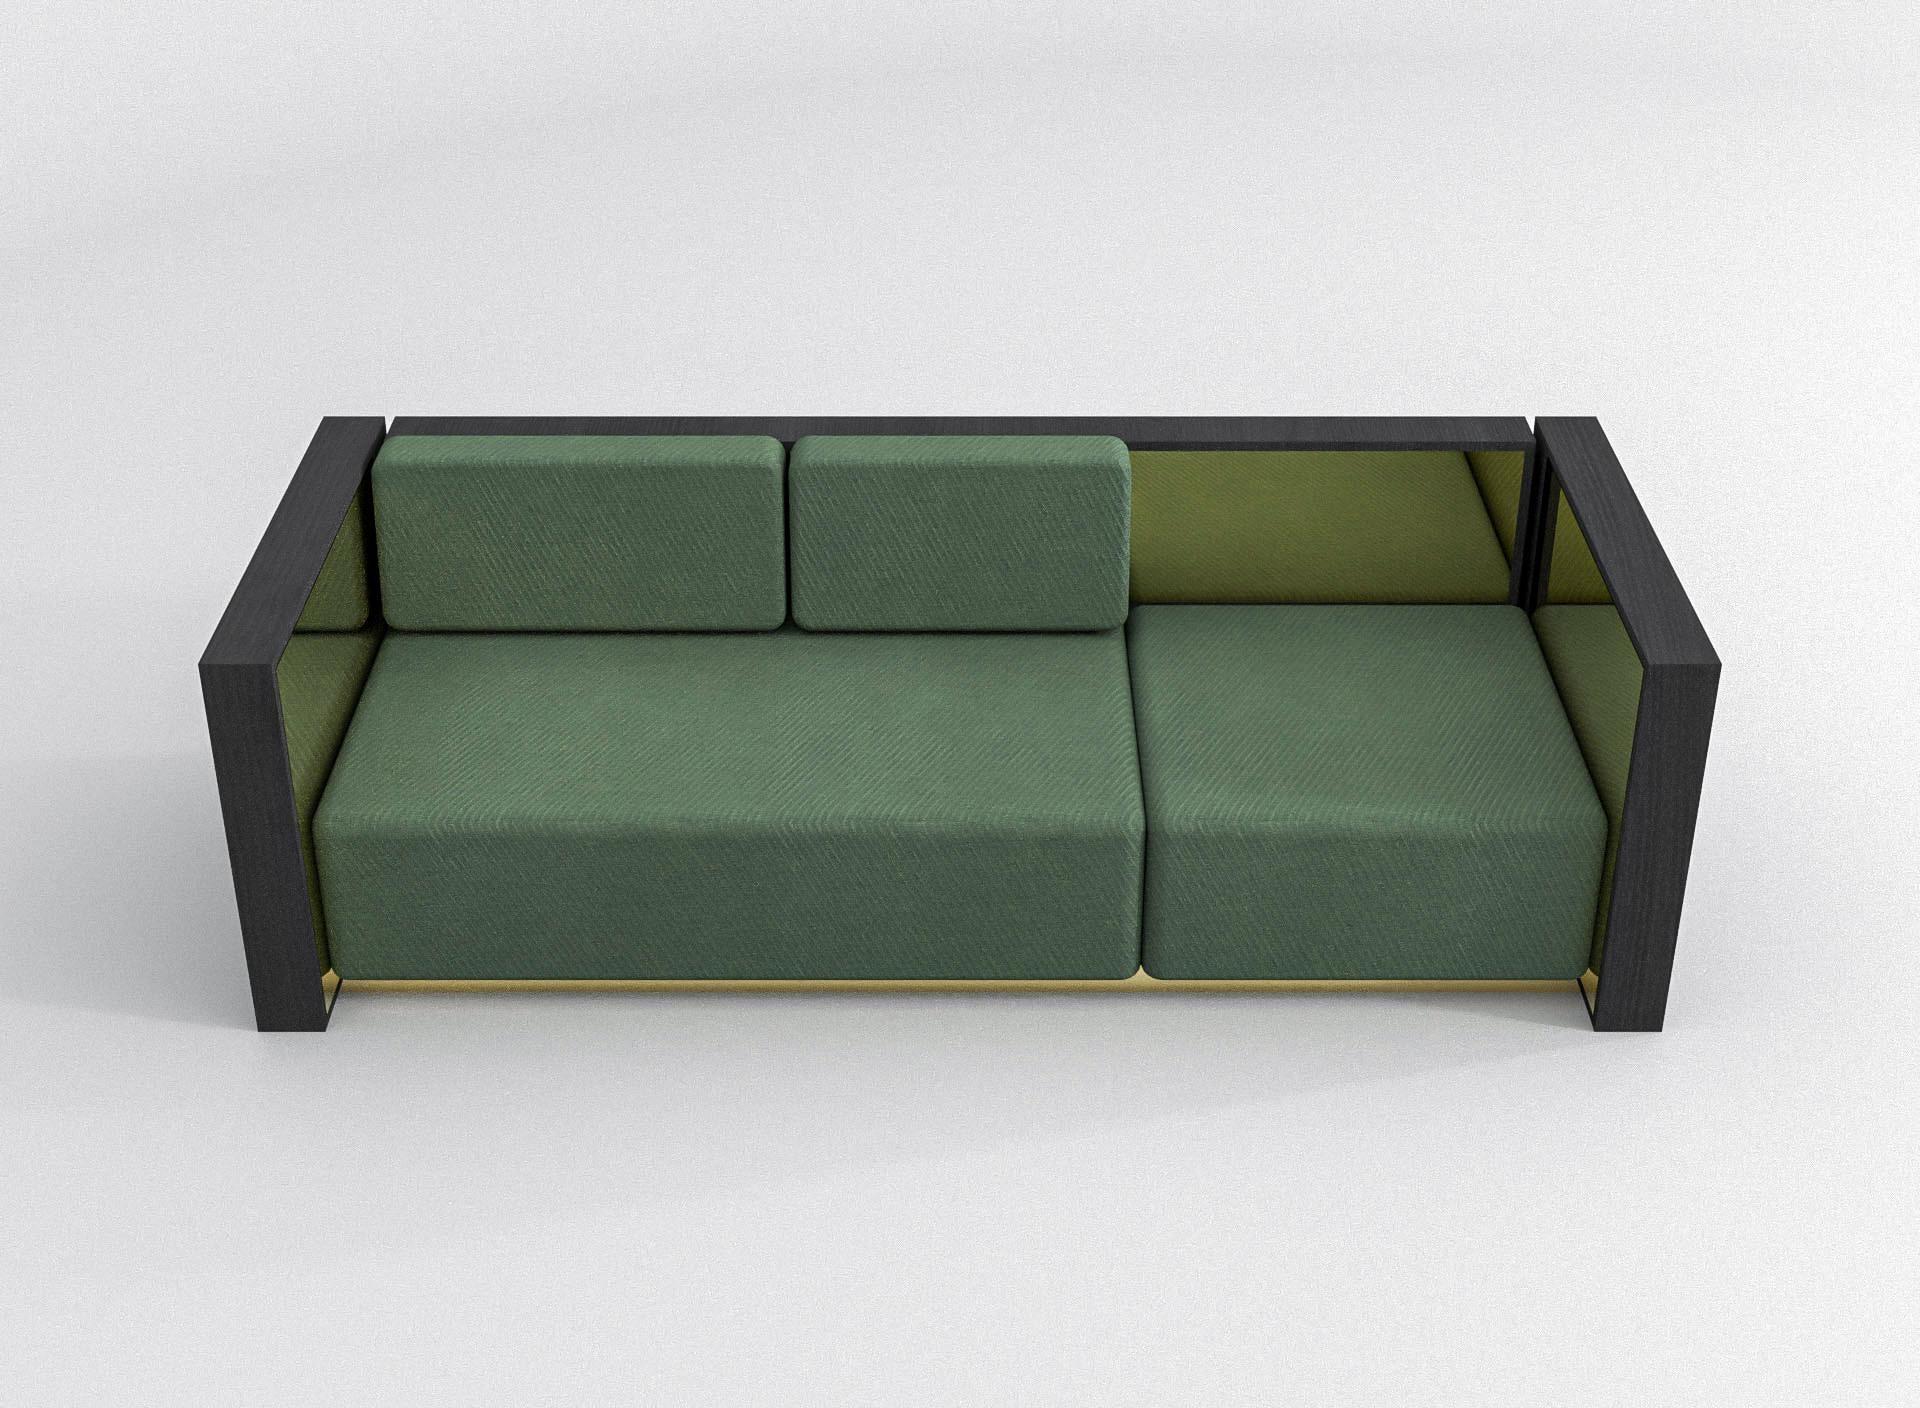 Art Deco Barh Sofa in Black Stained Ash Wood, Brass and Green Upholstery, 3 Seater For Sale